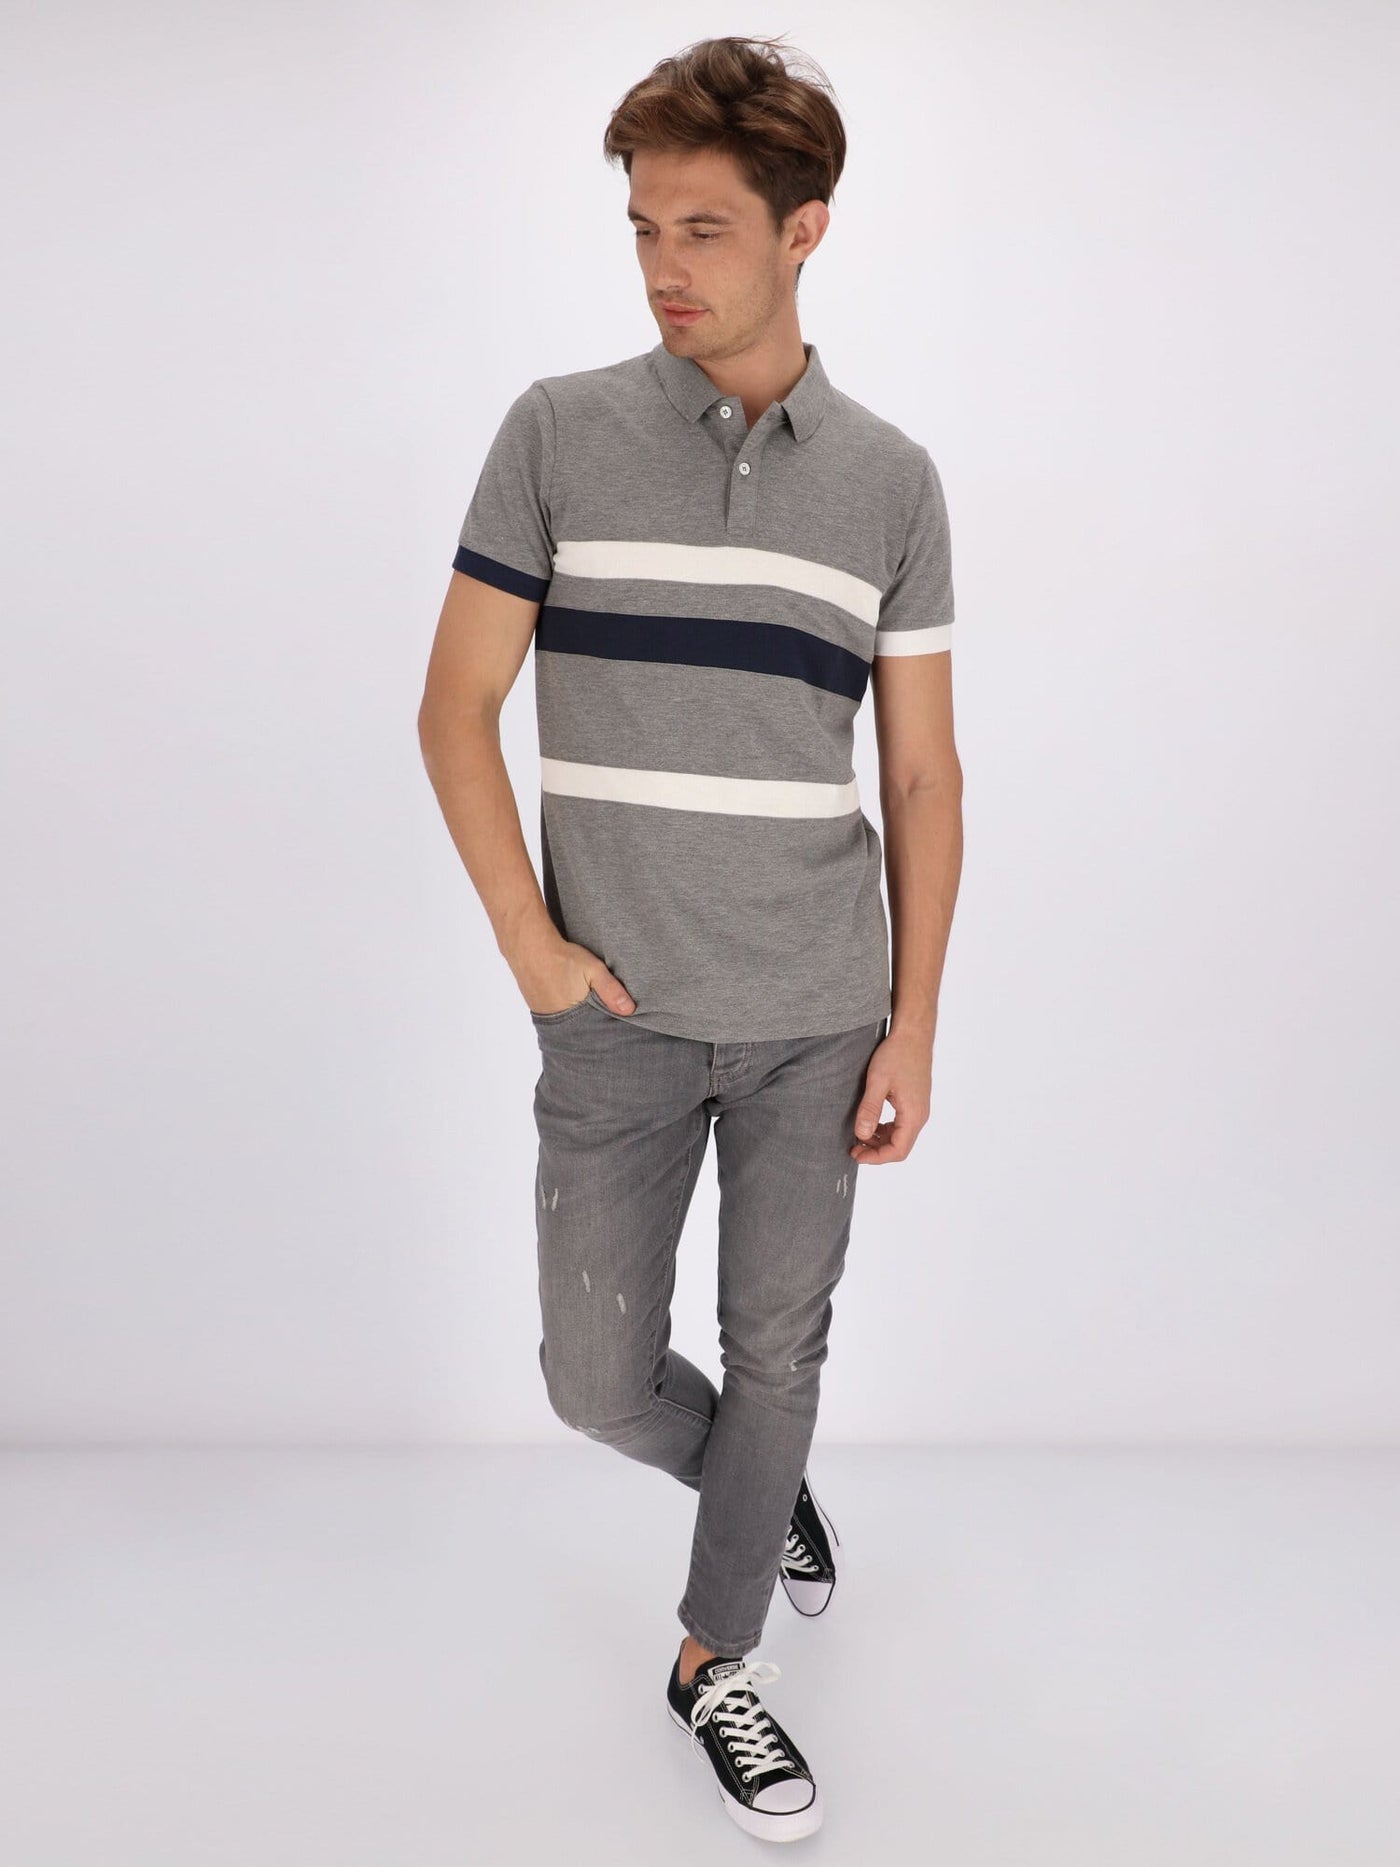 OR Polos Striped Polo Shirt with Turn-Down Collar